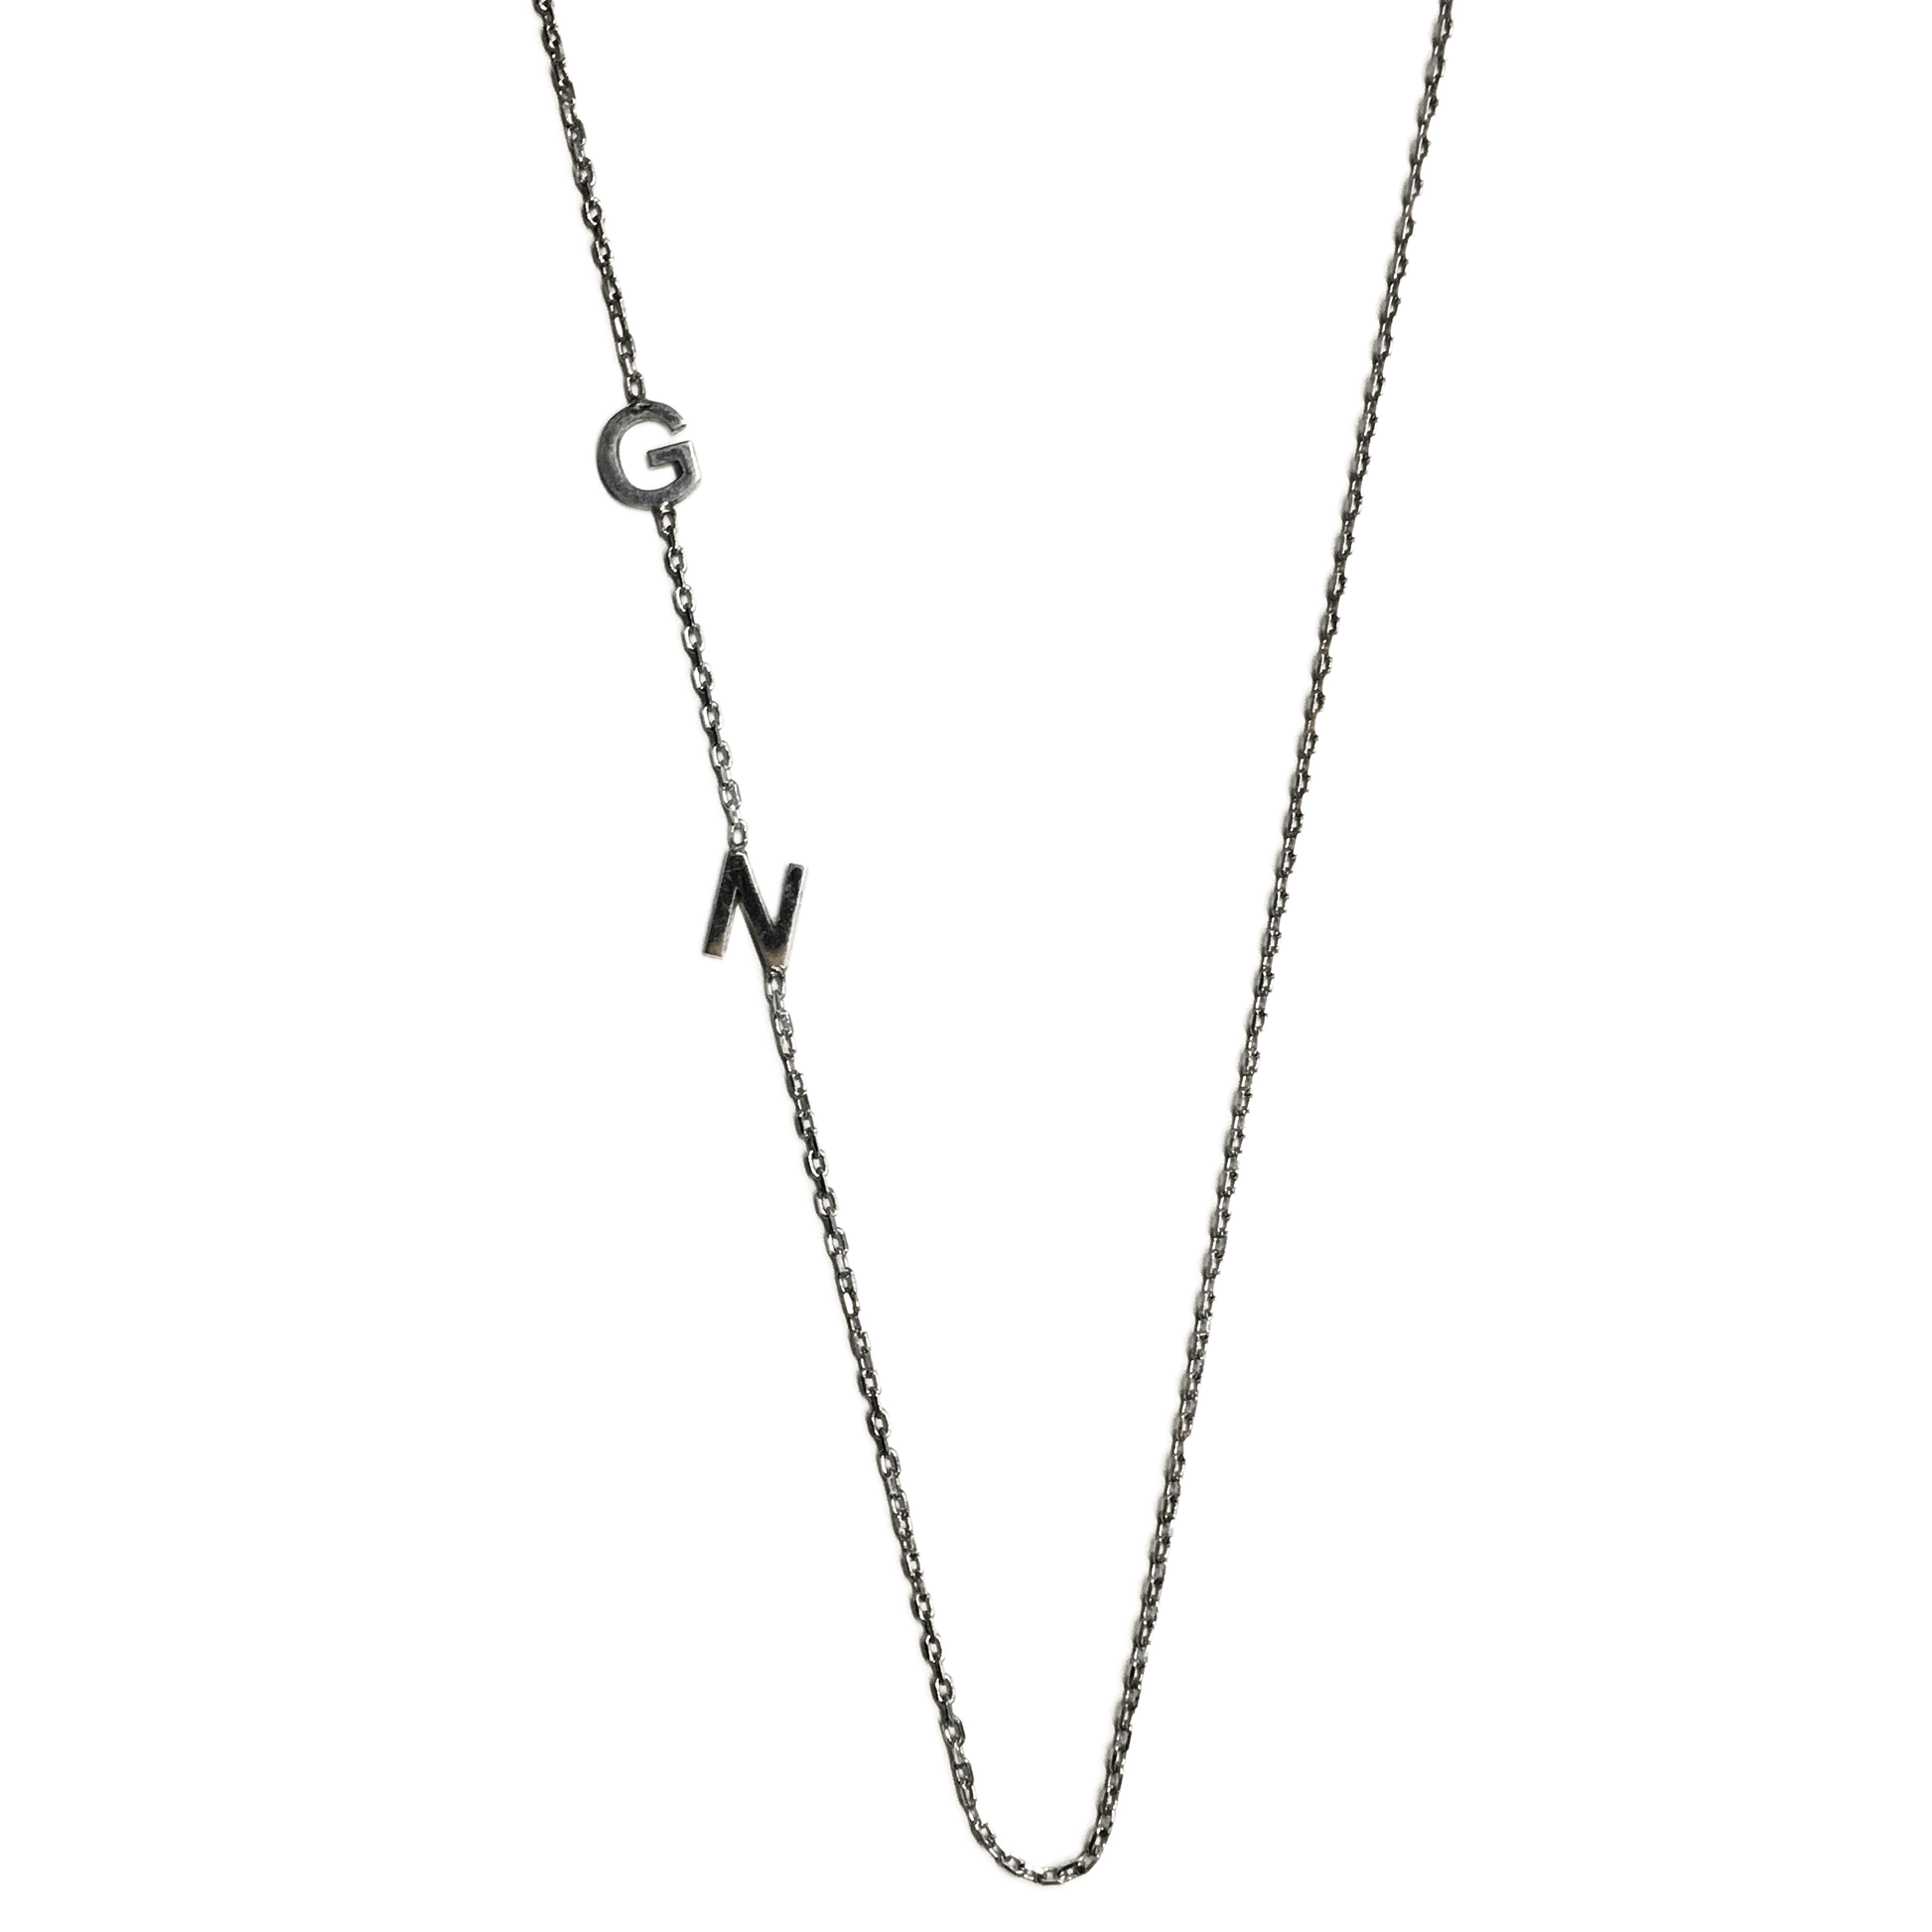 Necklace - 18" 925 Sterling Silver Minimalist Letter G & N Necklace - Asymmetrical Station Chain Necklace - Discount Jewelry- Blingschlingers Jewelry